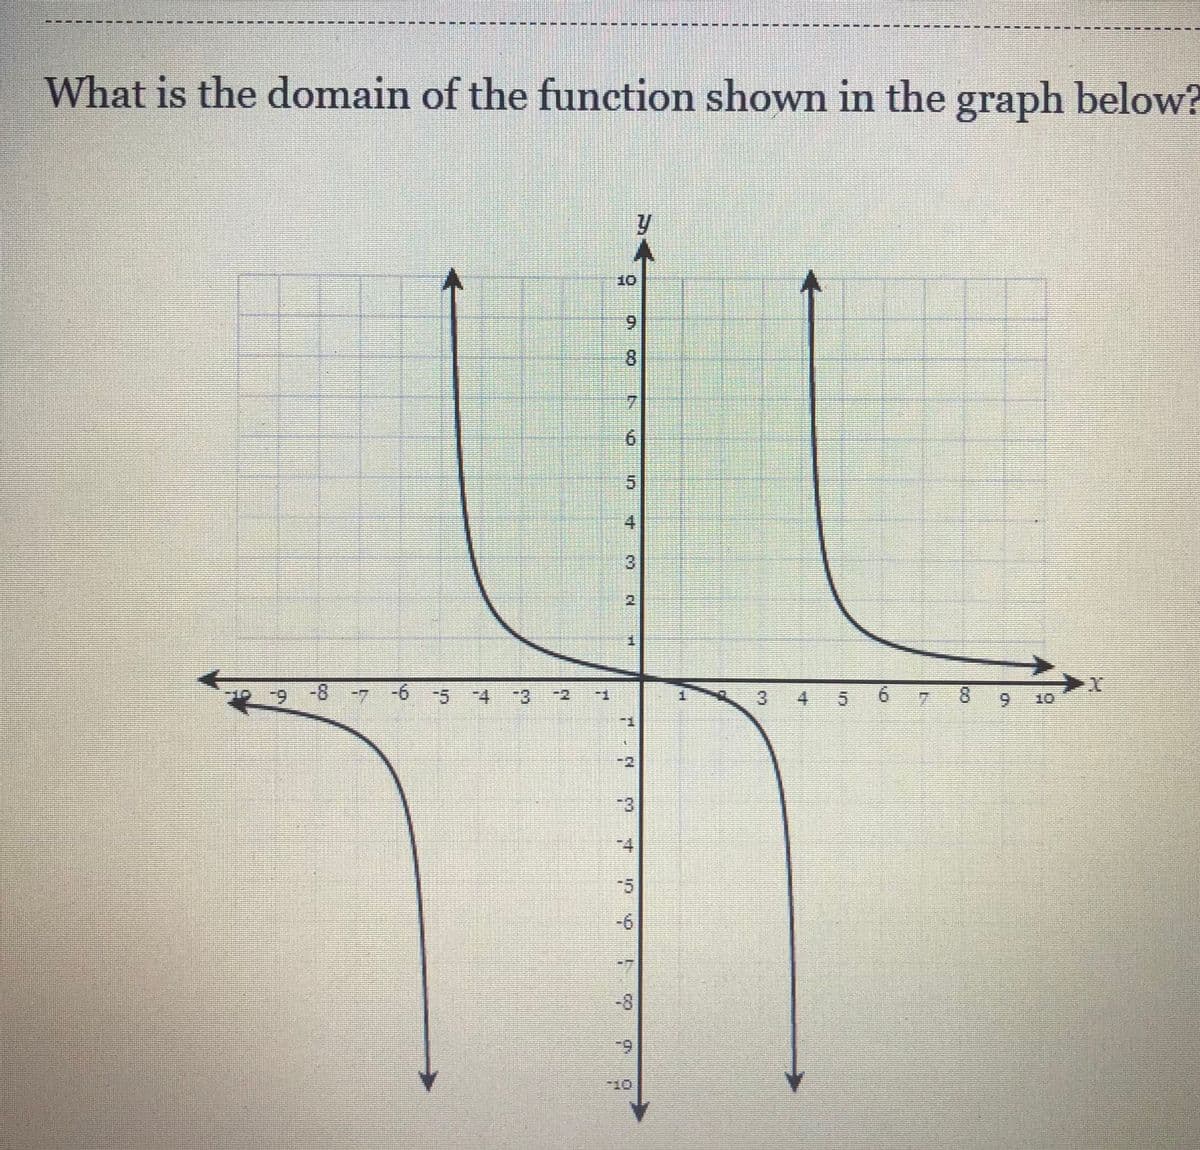 What is the domain of the function shown in the graph below?
6.
8
4
3.
2
8- 6-
9-
-5 4 3
-2
3
4
5.
9.
8.
6.
10
-3
-4
-6
-8
23
ON
in
